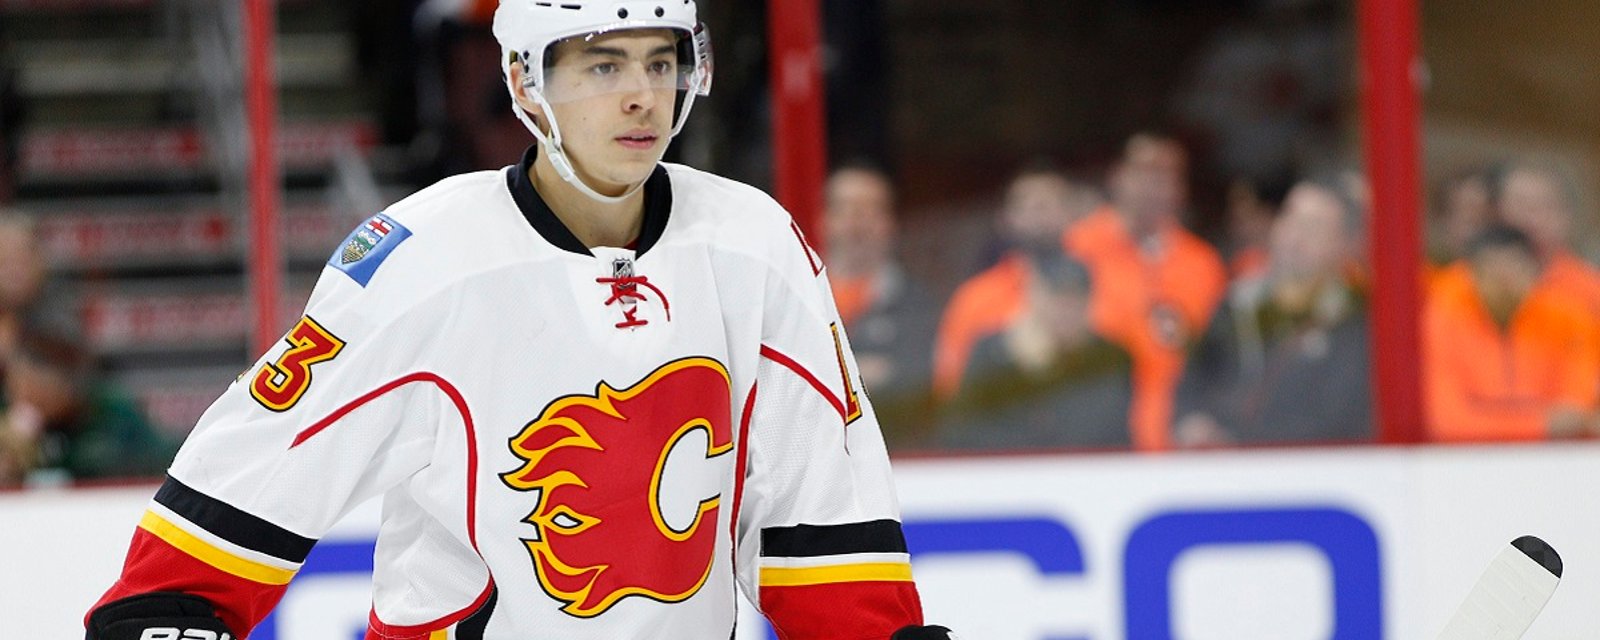 Report: Flames GM heading to New York to discuss Gaudreau's future.